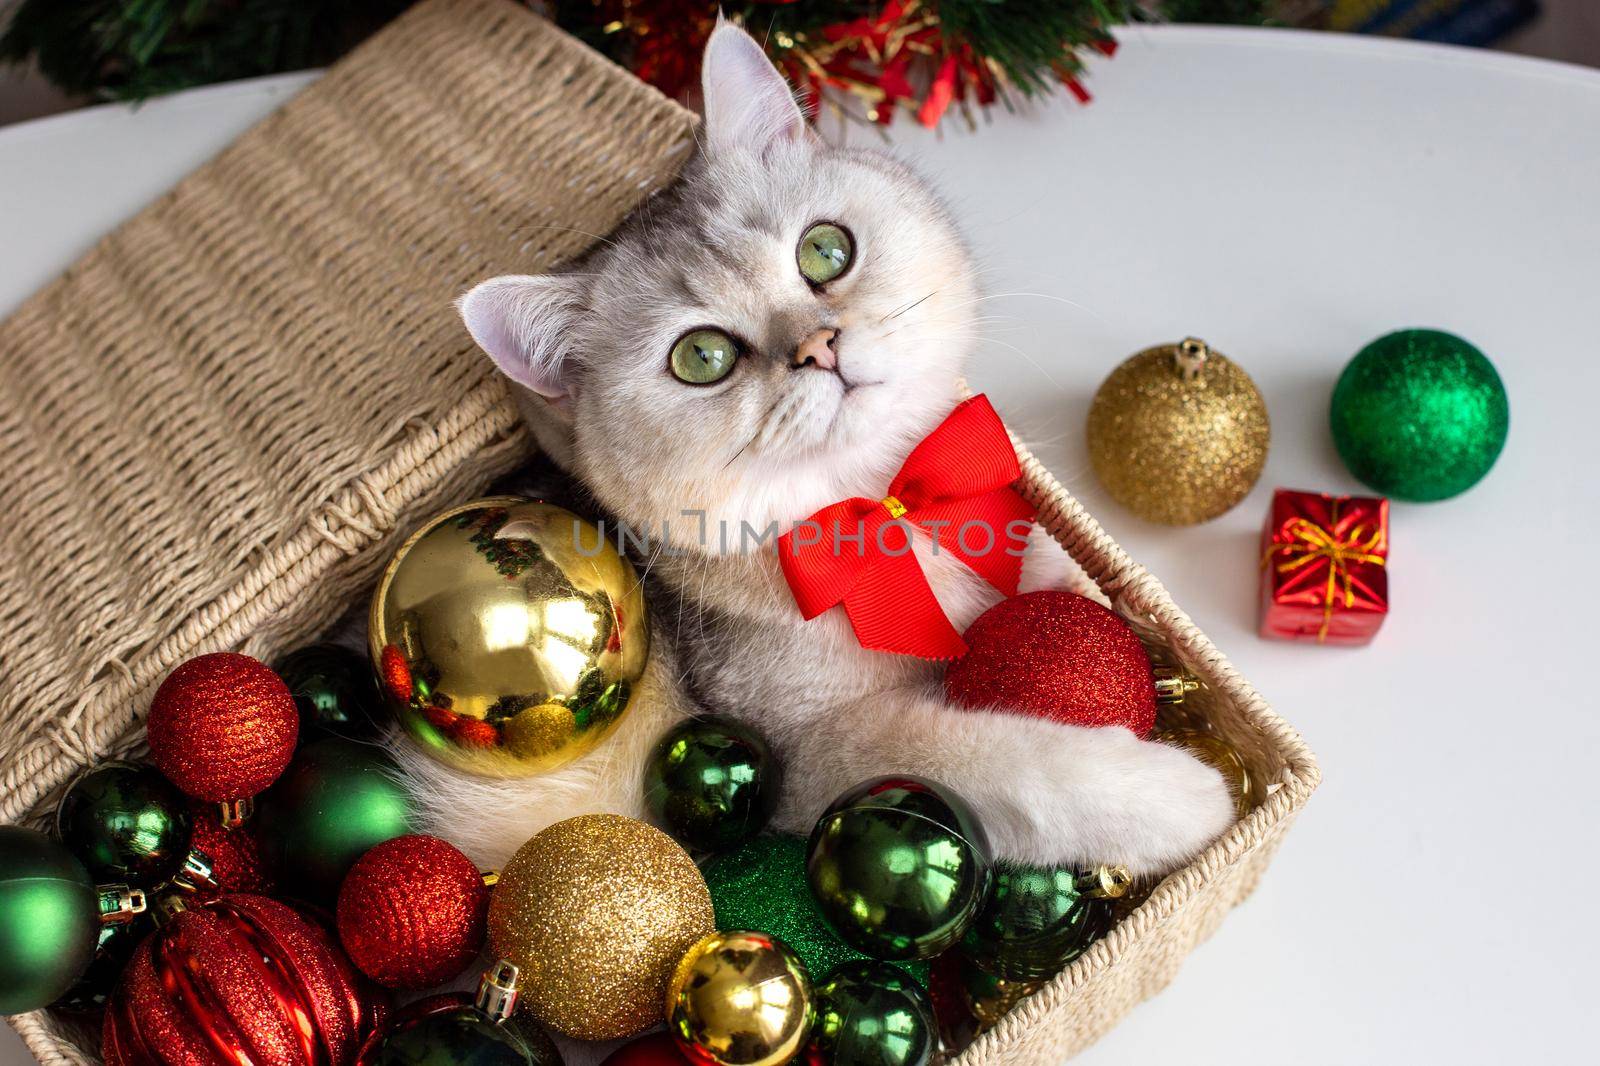 An adorable white cat in a red bow tie lies in a wicker basket near a Christmas tree, in multi-colored Christmas balls. Top view